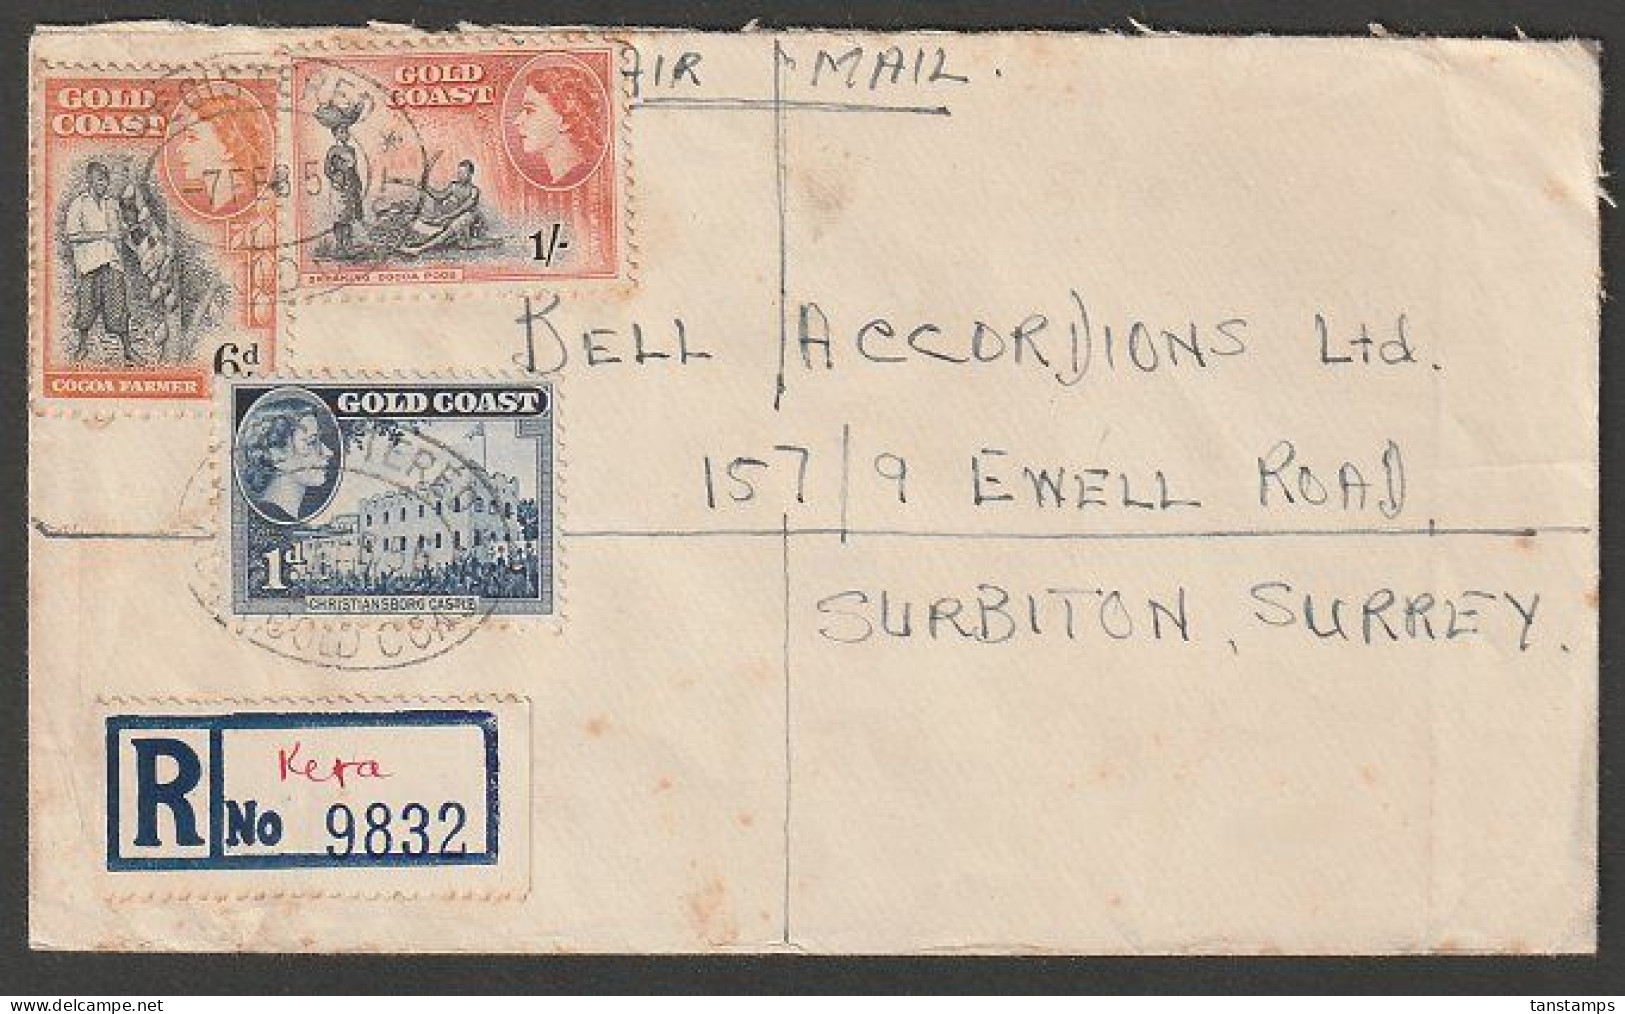 GOLD COAST - ENGLAND QEII 1/7 REGISTERED AIRMAIL RATE - Côte D'Or (...-1957)